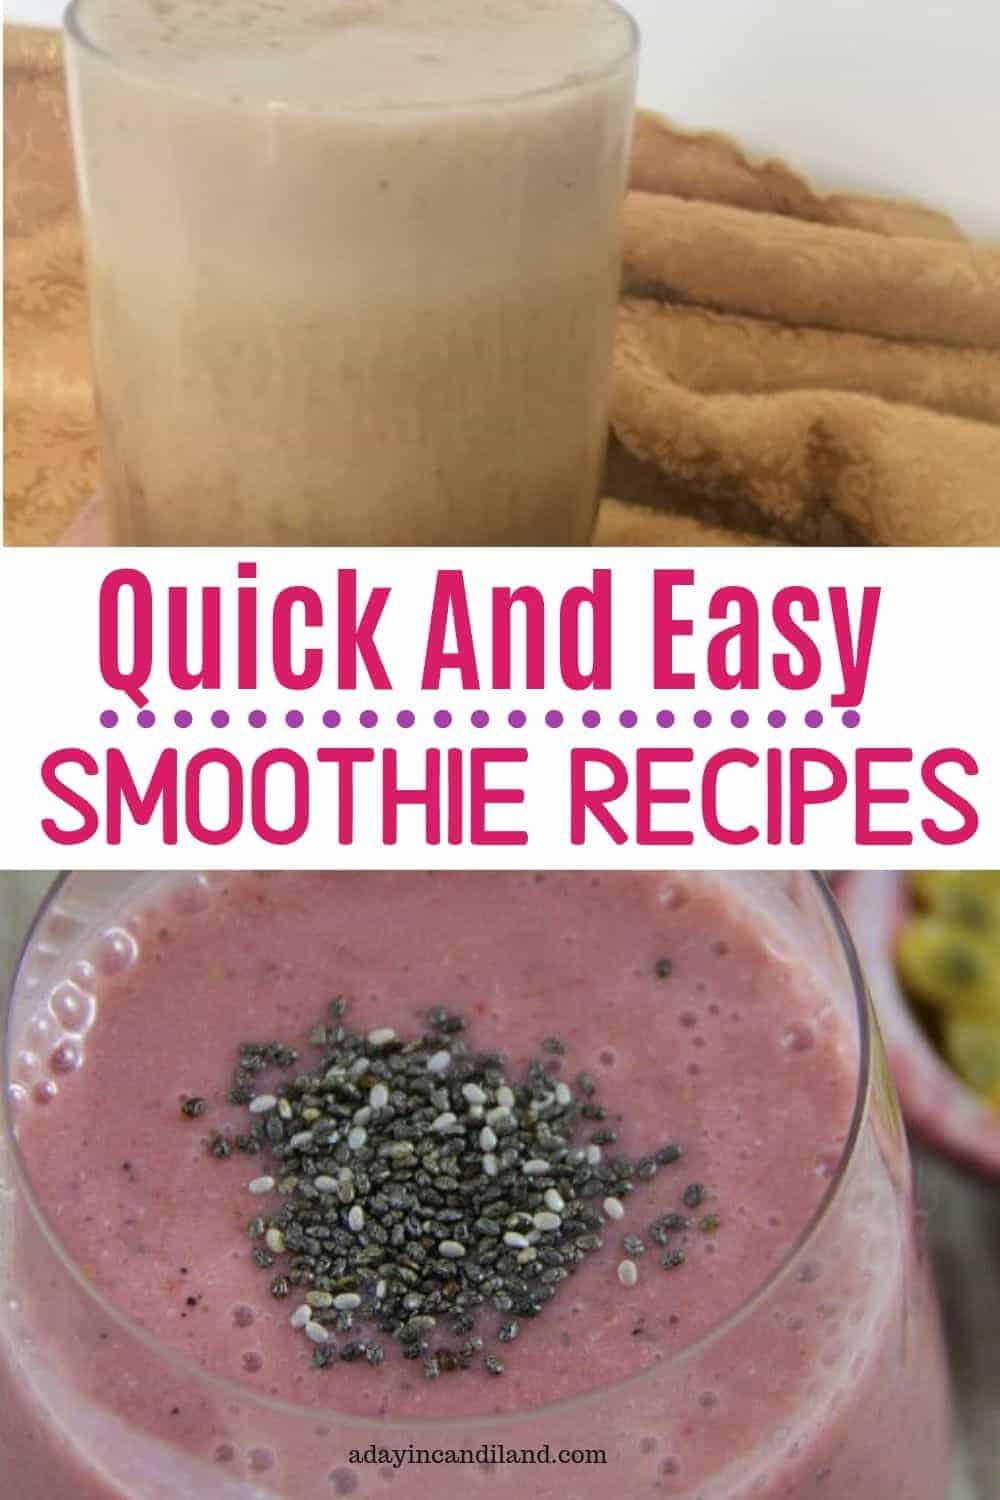 11 Non-Dairy Smoothie Recipes - A Day In Candiland